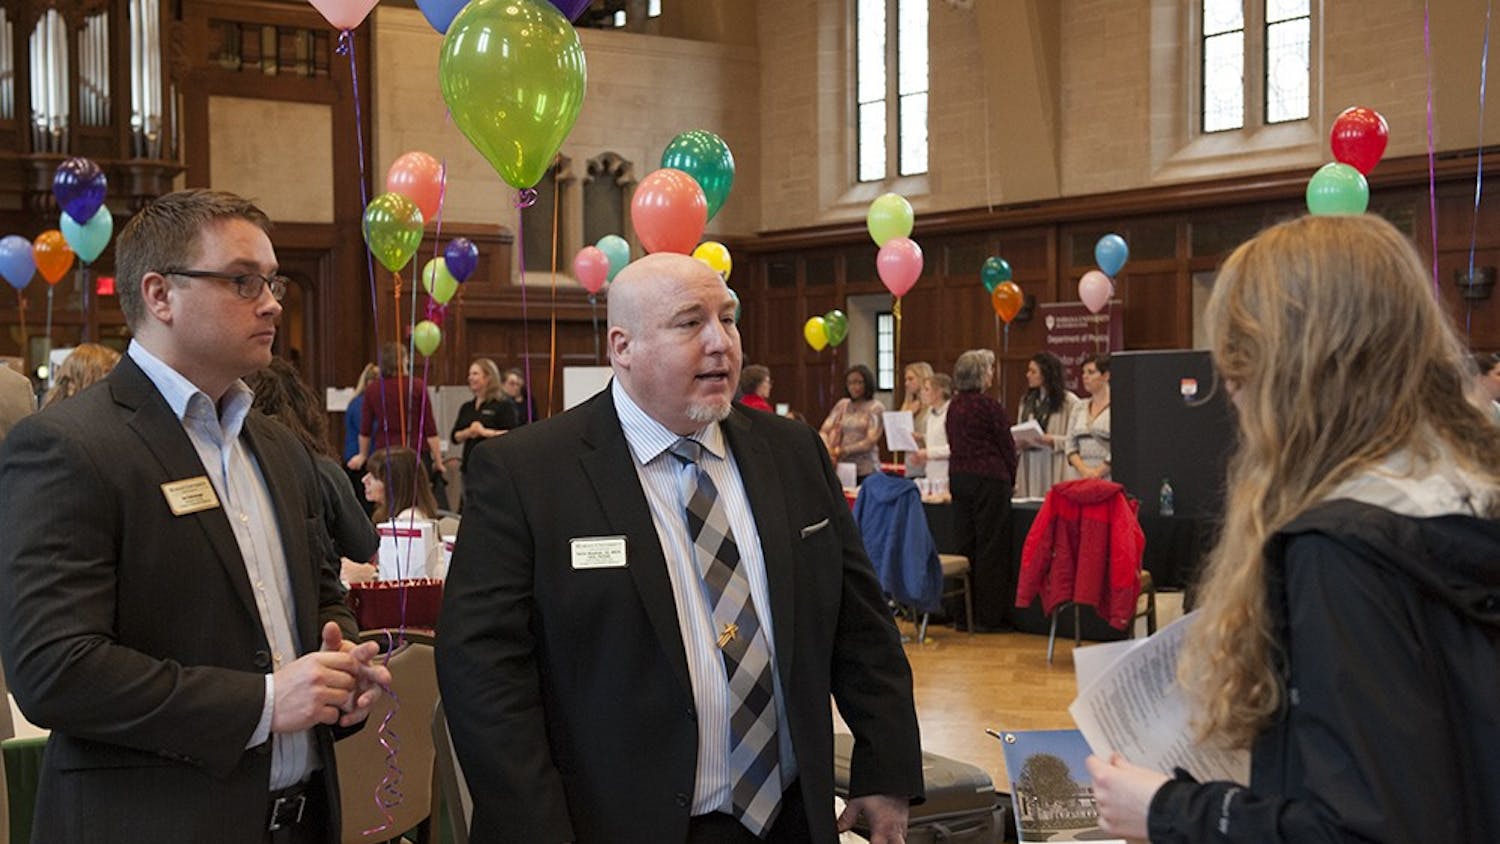 Dan Kellenberger (left), Assistant Director Marketing, Recruitment and Admissions and Dr. Patrick Woodman, DO (right) of Marian University speaking to one of the attendees of the Health Programs Fair held on Tuesday at the Alumni Hall in the IMU